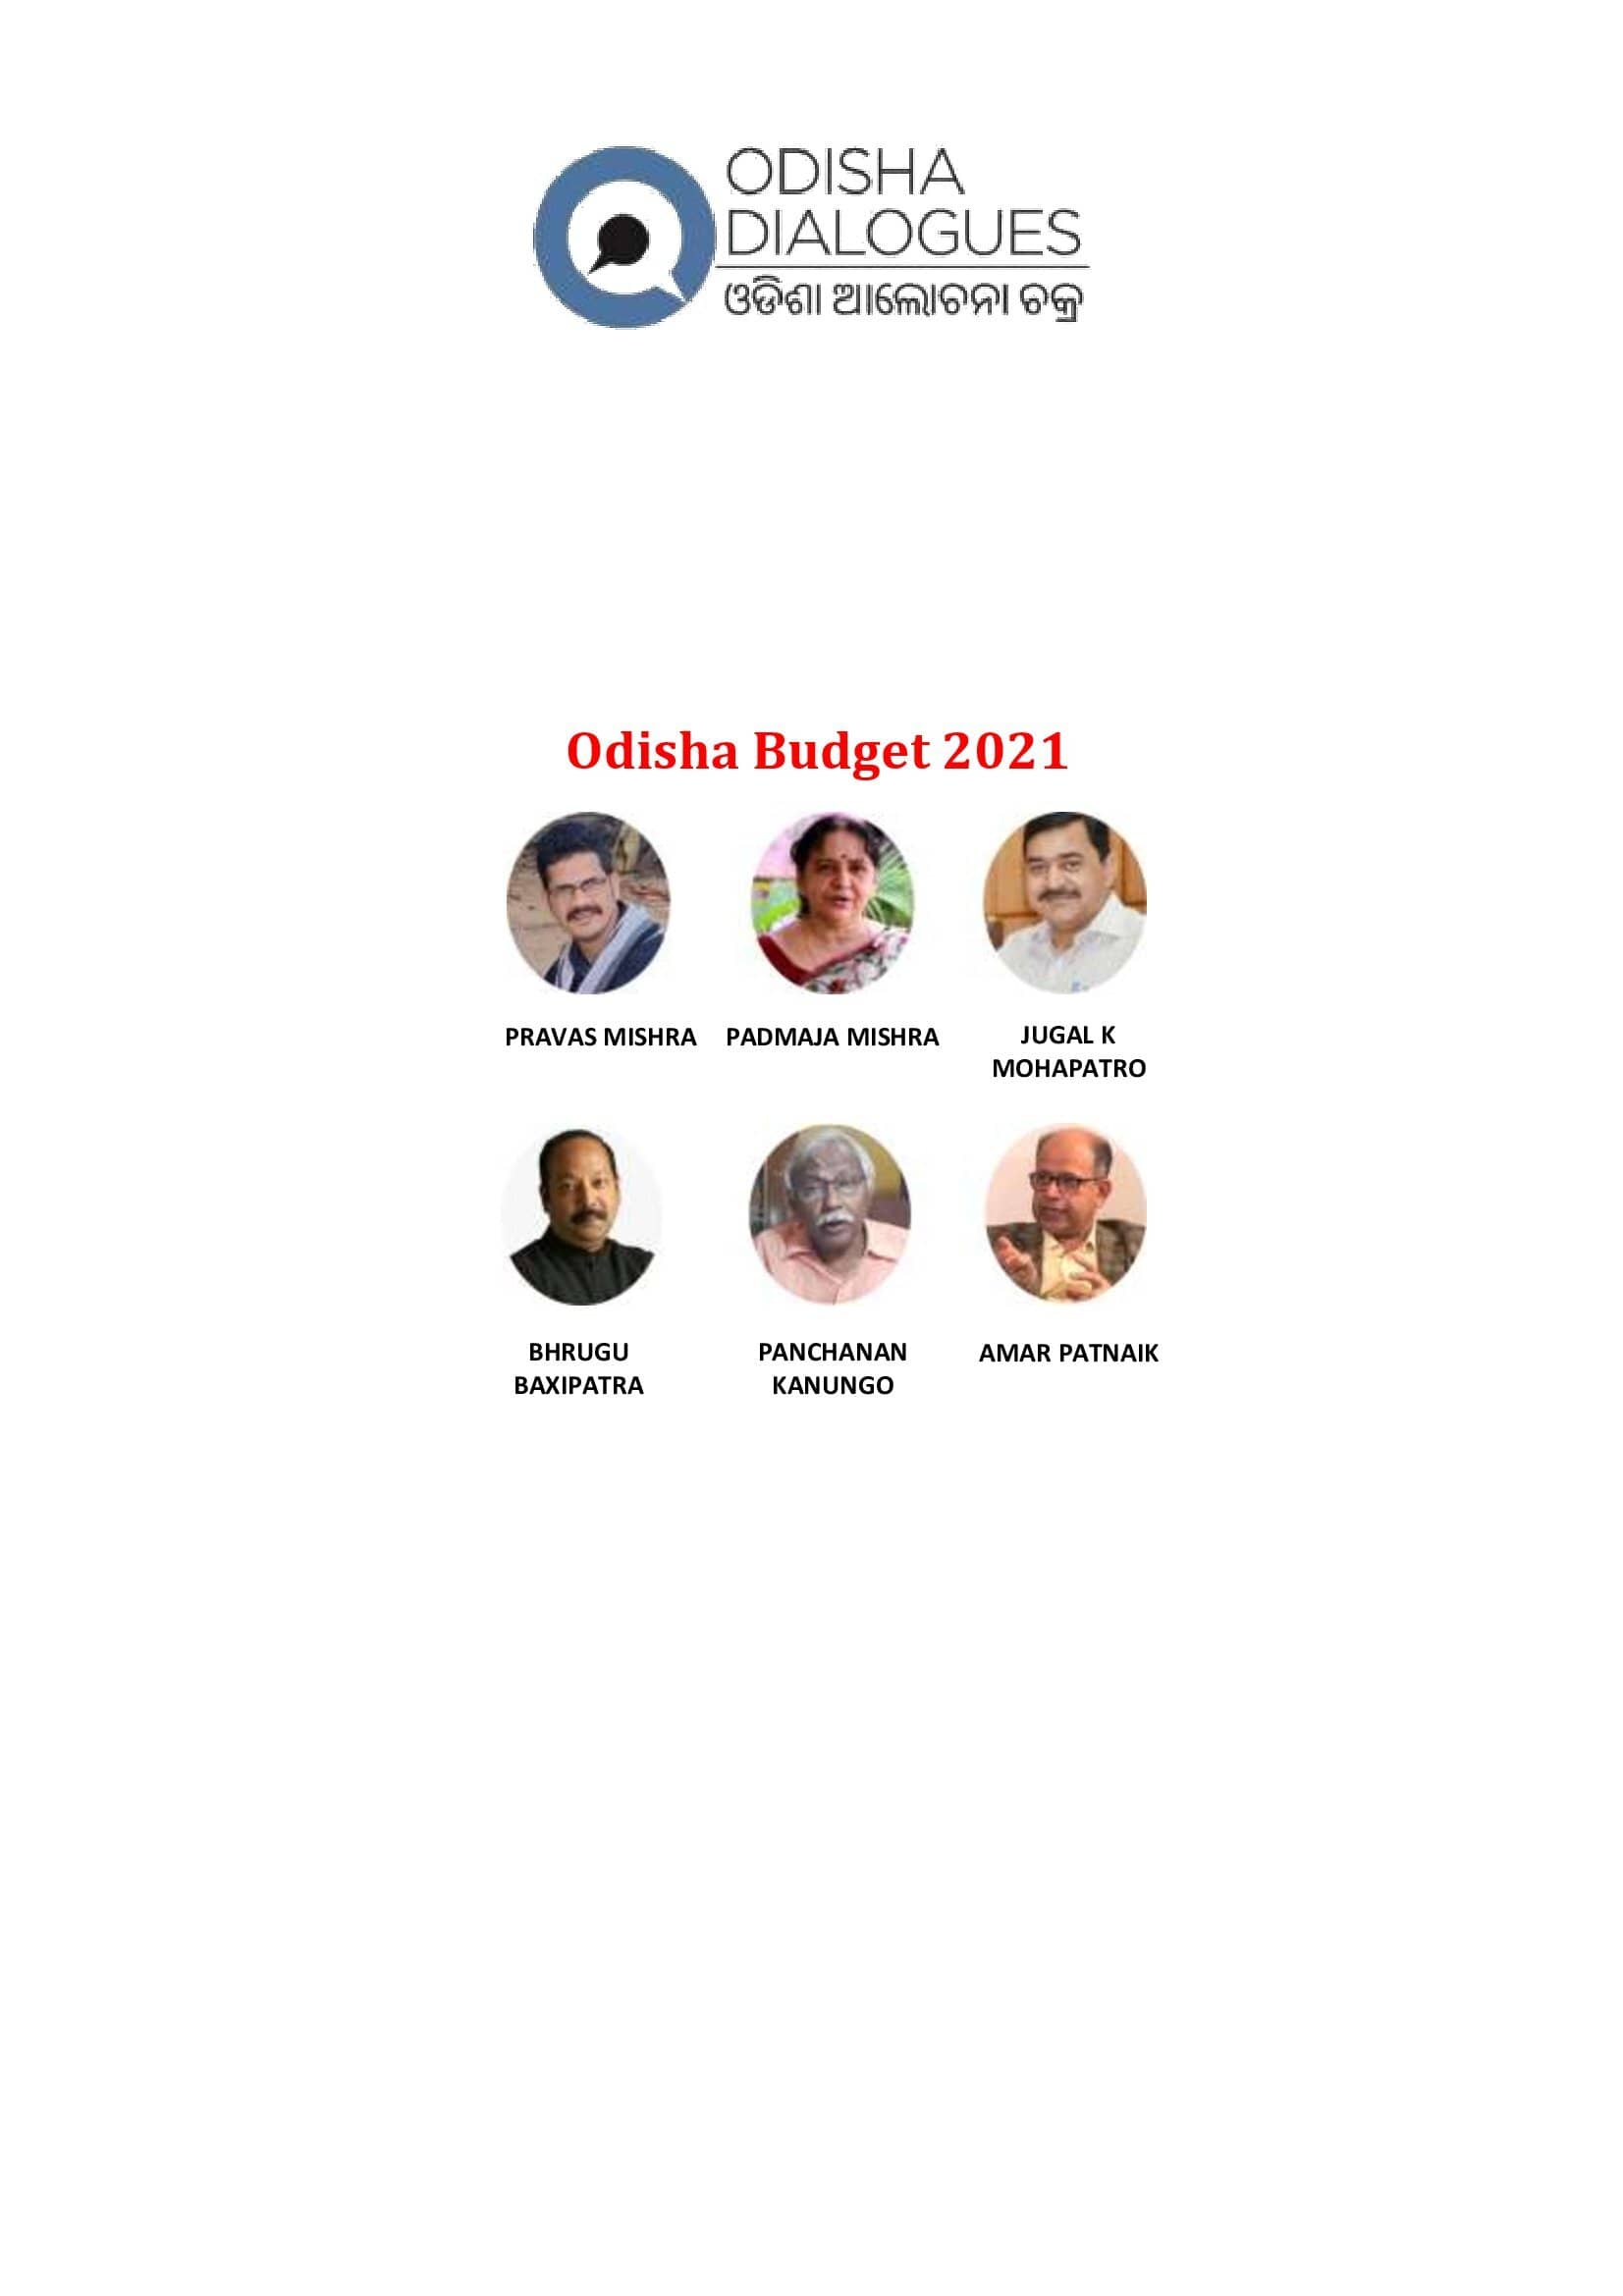 Post Pandemic Recovery And Odisha Budget 2021